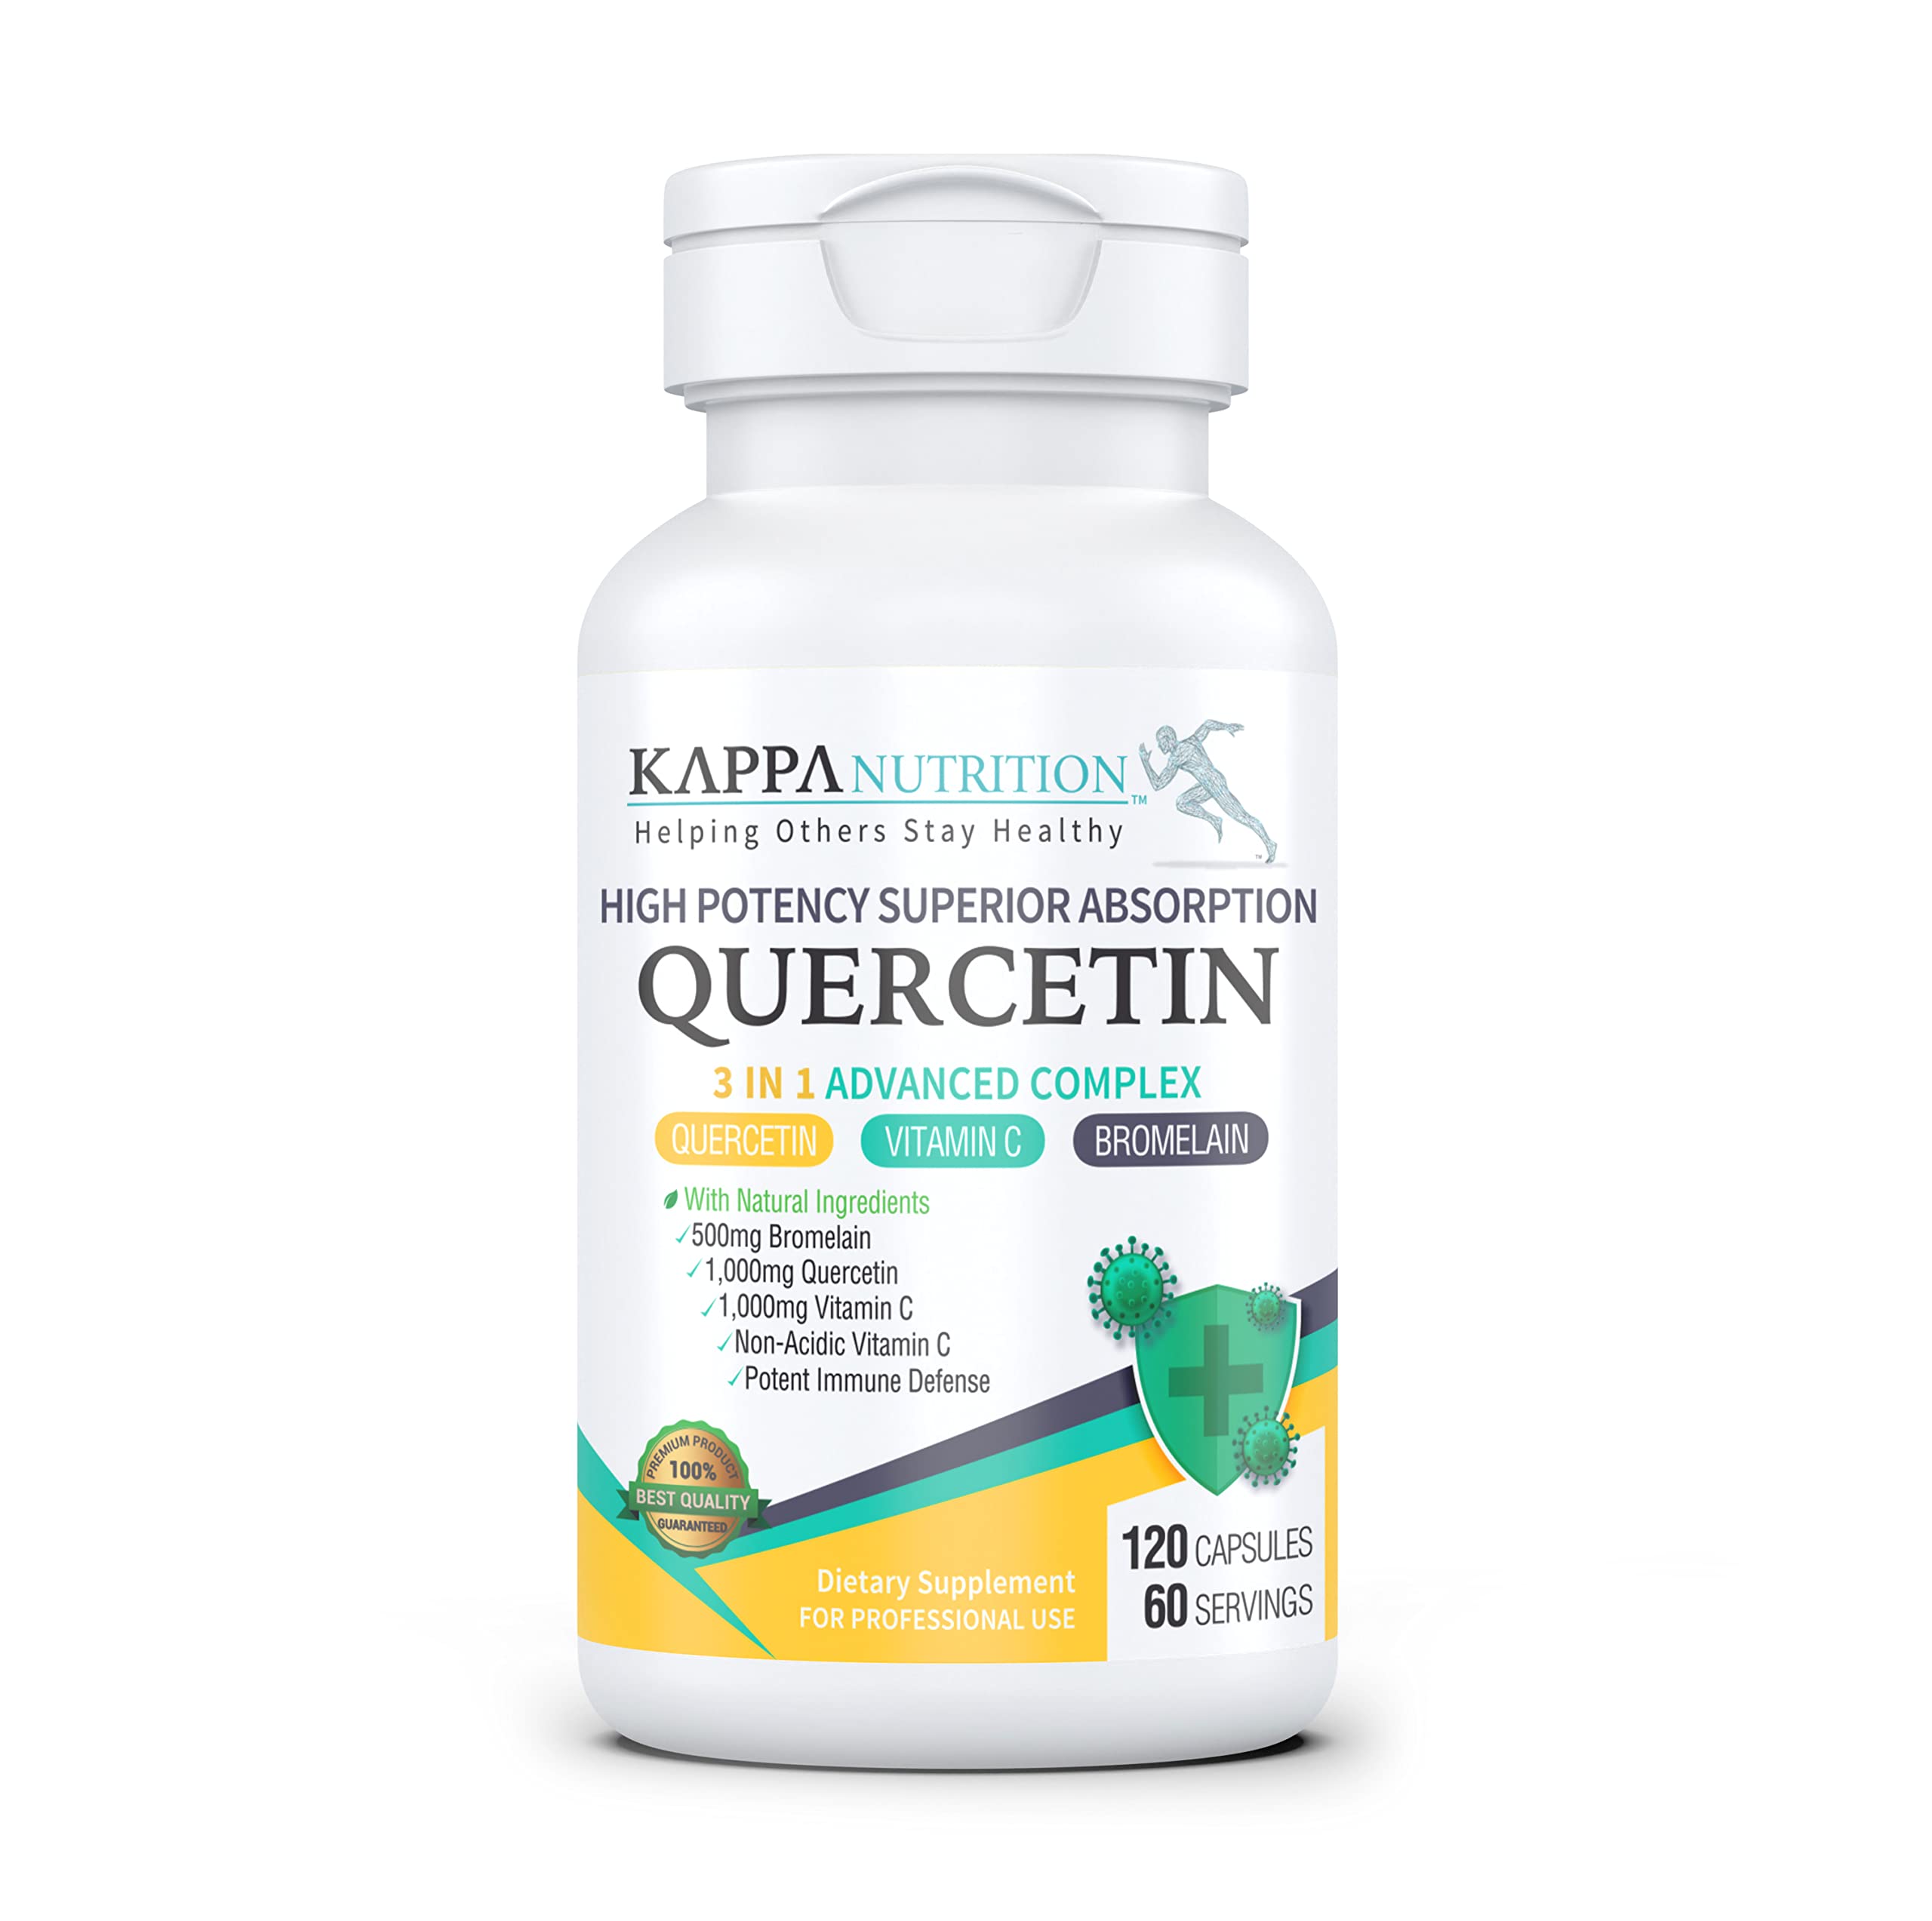 120 Capsules), Quercetin 1,000mg, Bromelain 500mg and Vitamin C 1,000mg, 1 from Kappa Nutrition. Supports Immune, Cardiovascular & Respiratory Health, Seasonal Allergy Relief.